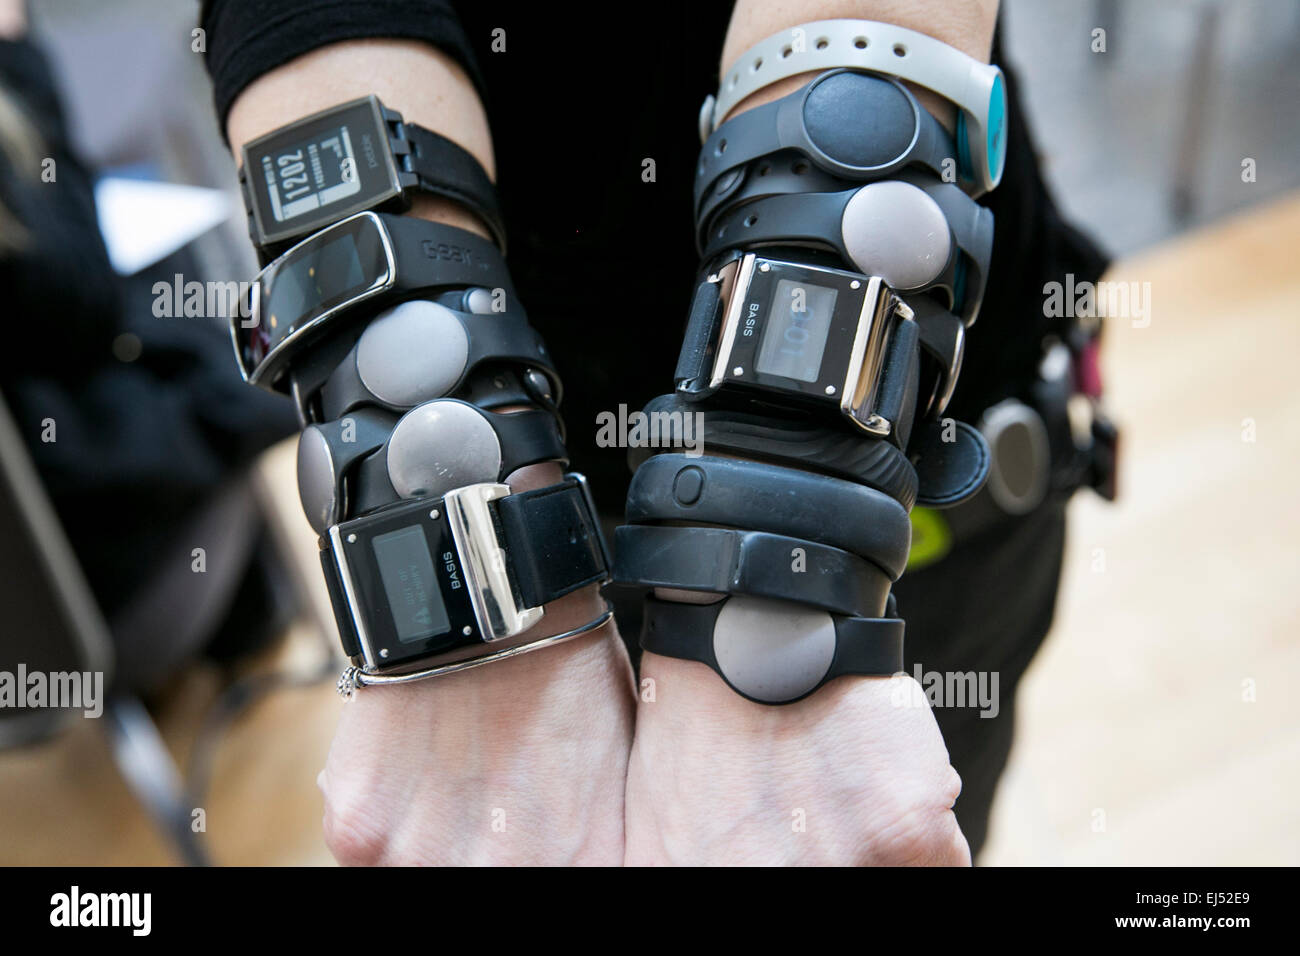 An individual is pictured wearing multiple wearable technology devices including the Nike FuelBand, Fitbit, Basis, Pebble, Jawbo Stock Photo